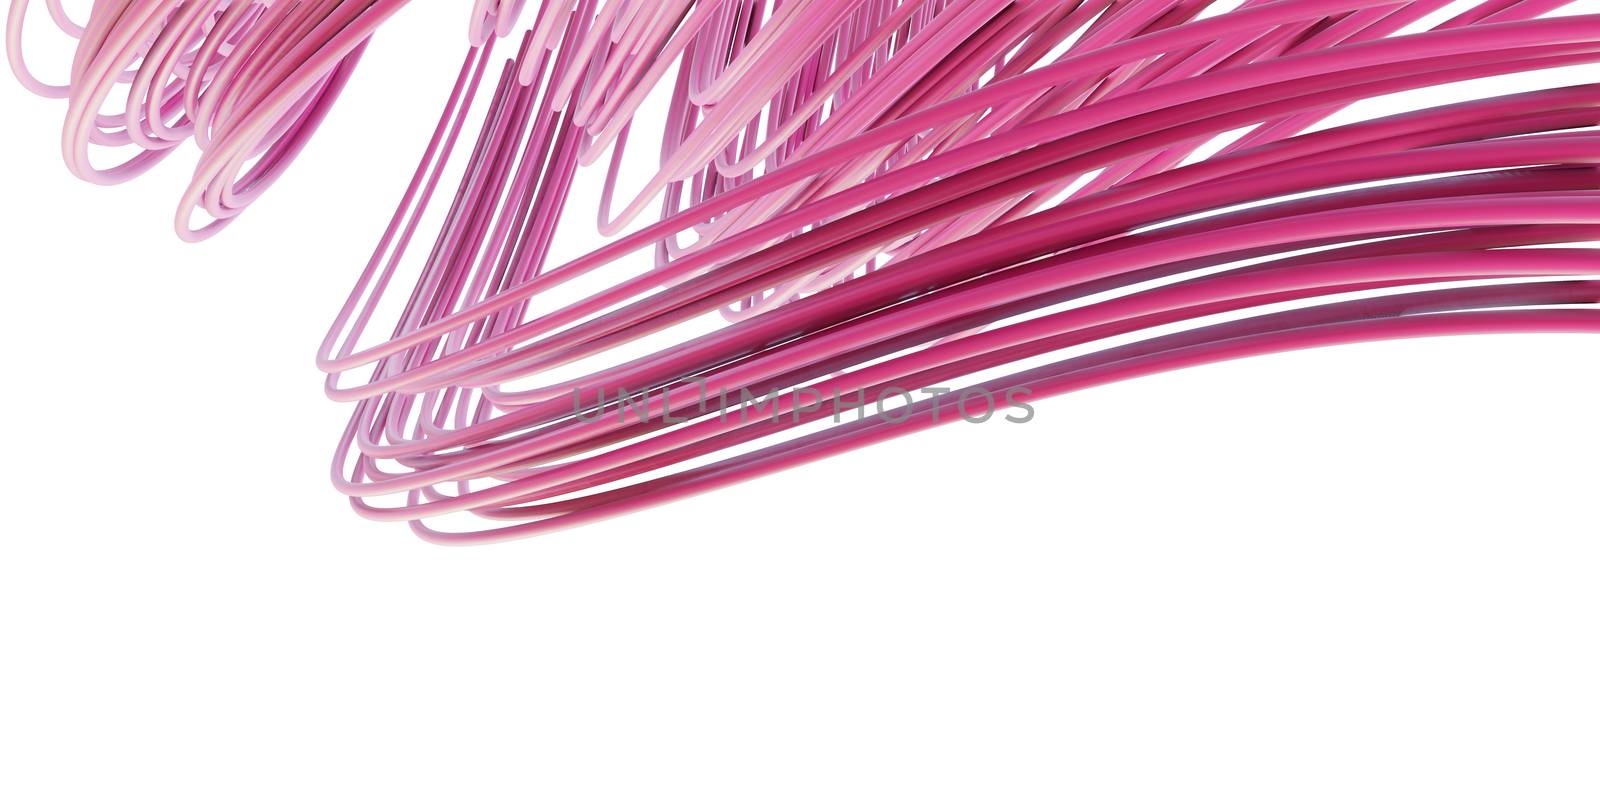 Abstract pink smooth lines on white background. 3D illustration. Beautiful background for your design